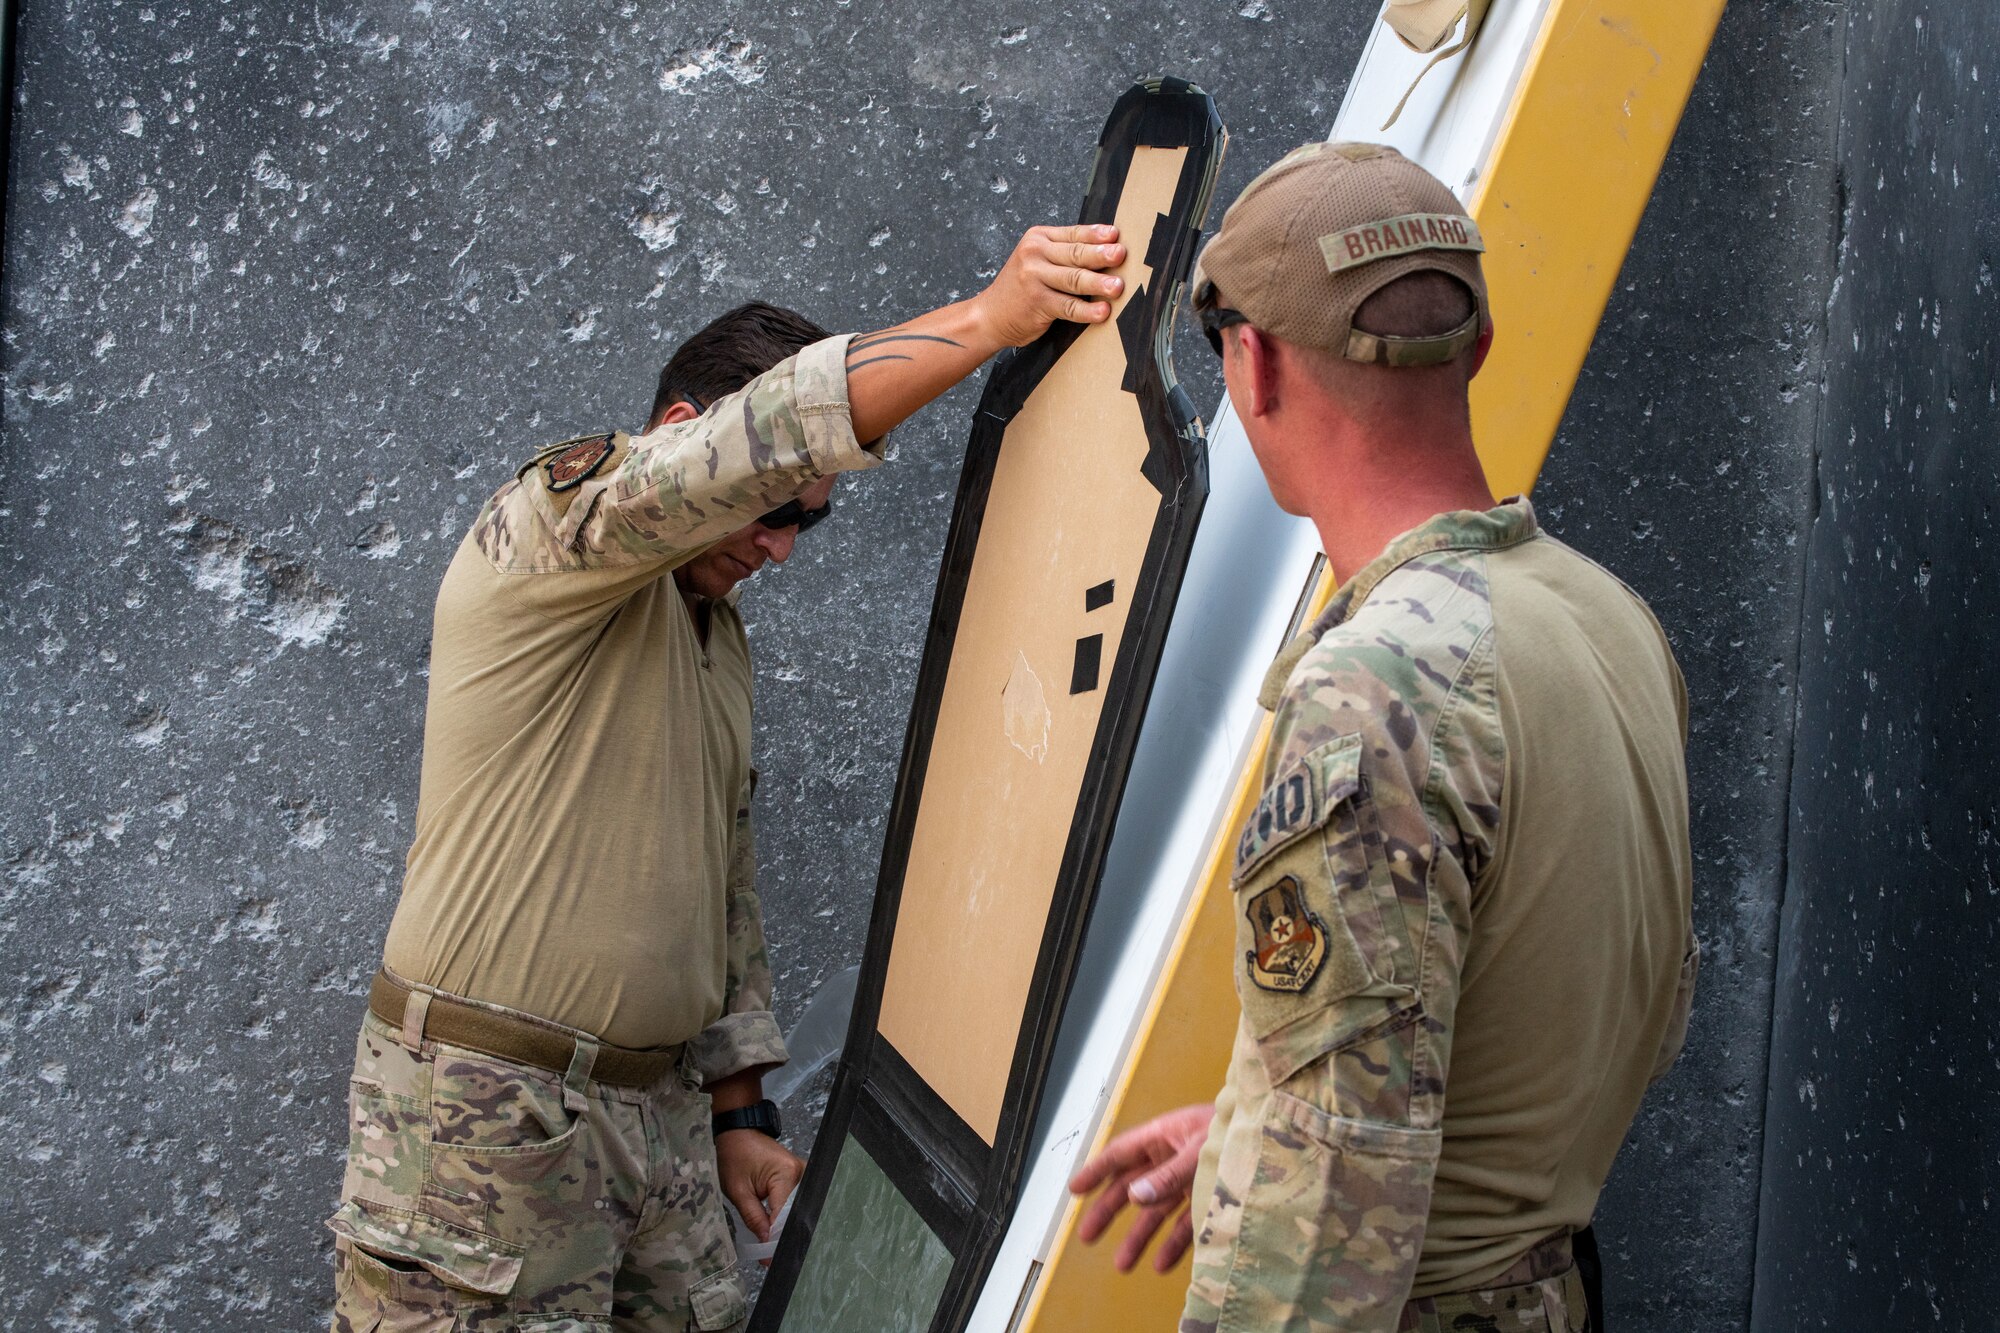 U.S. Air Force Staff Sgt. Josiah Brainard and Staff Sgt. George Cochran, explosive ordinance disposal technicians with the 379th Expeditionary Civil Engineer Squadron, place a cardboard silhouette, on a door frame on Al Udeid Air Base, Qatar, July 1, 2022. The cardboard is outlined with detonating cord, which is designed to create a large hole in the door. (U.S. Air National Guard photo by Airman 1st Class Constantine Bambakidis)